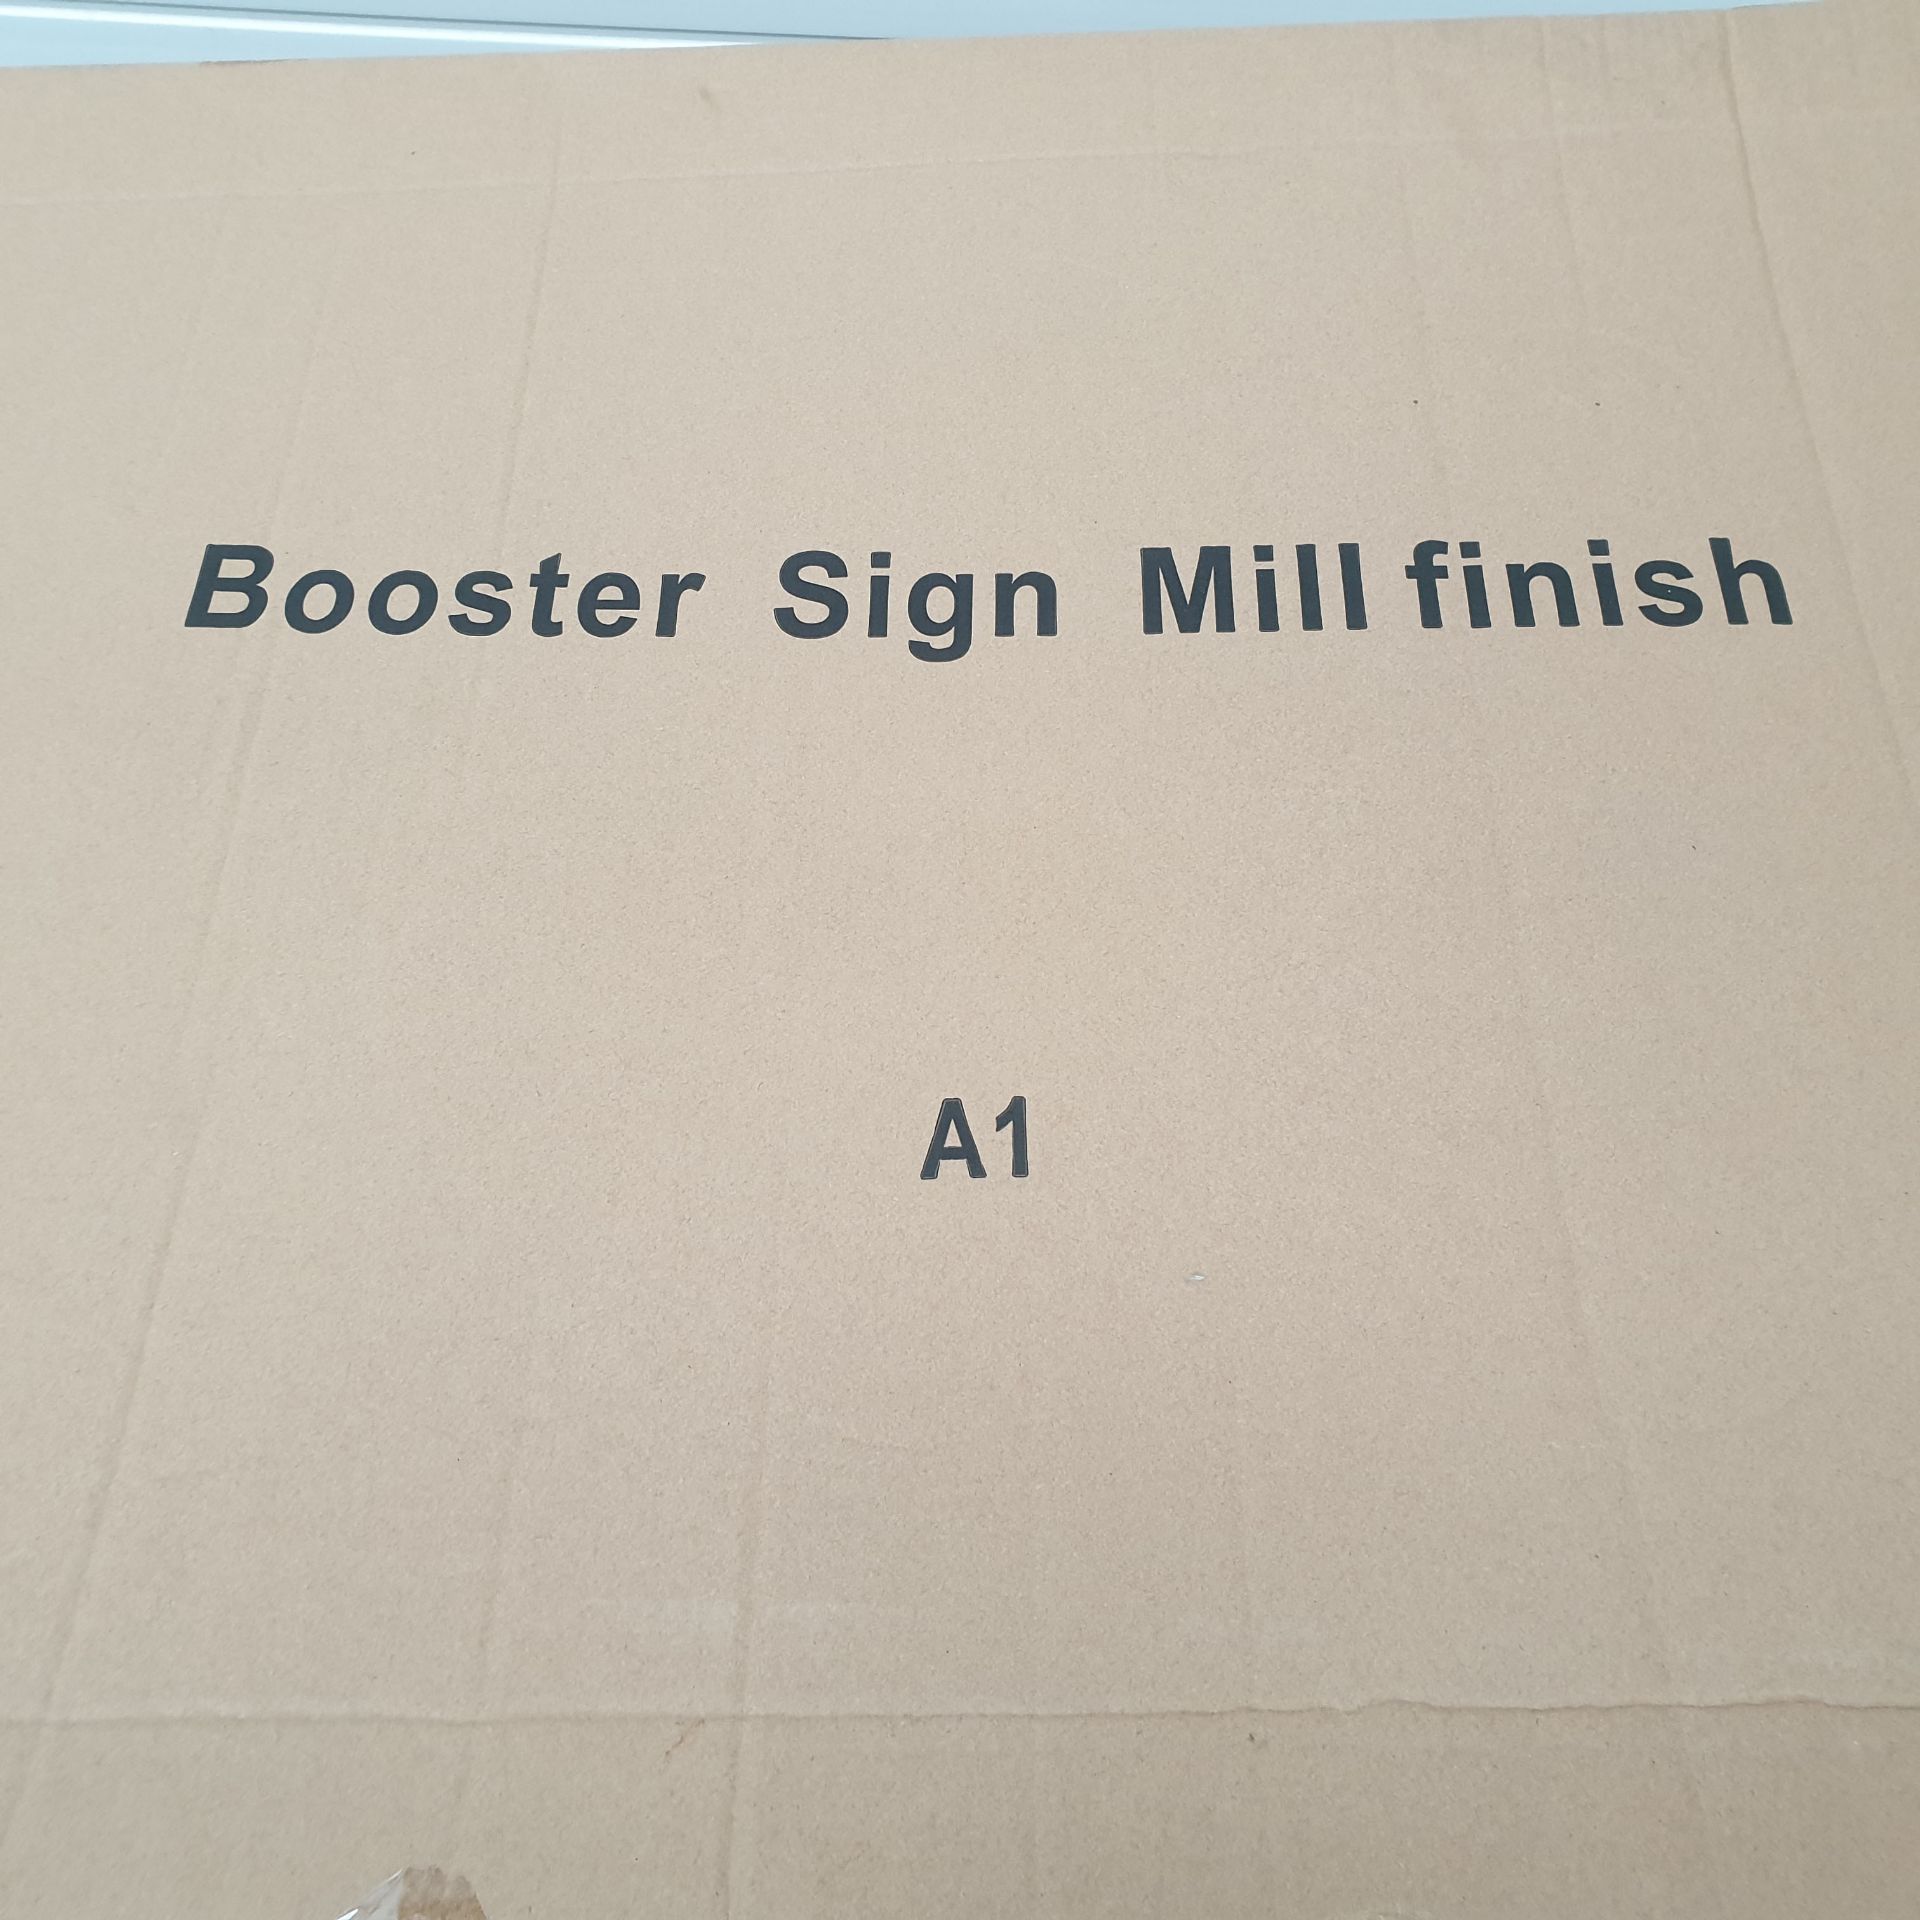 10 x Double Sided Steel 'A' Board Sign with Magnetic PVC Covers. Size A1. - Image 4 of 6